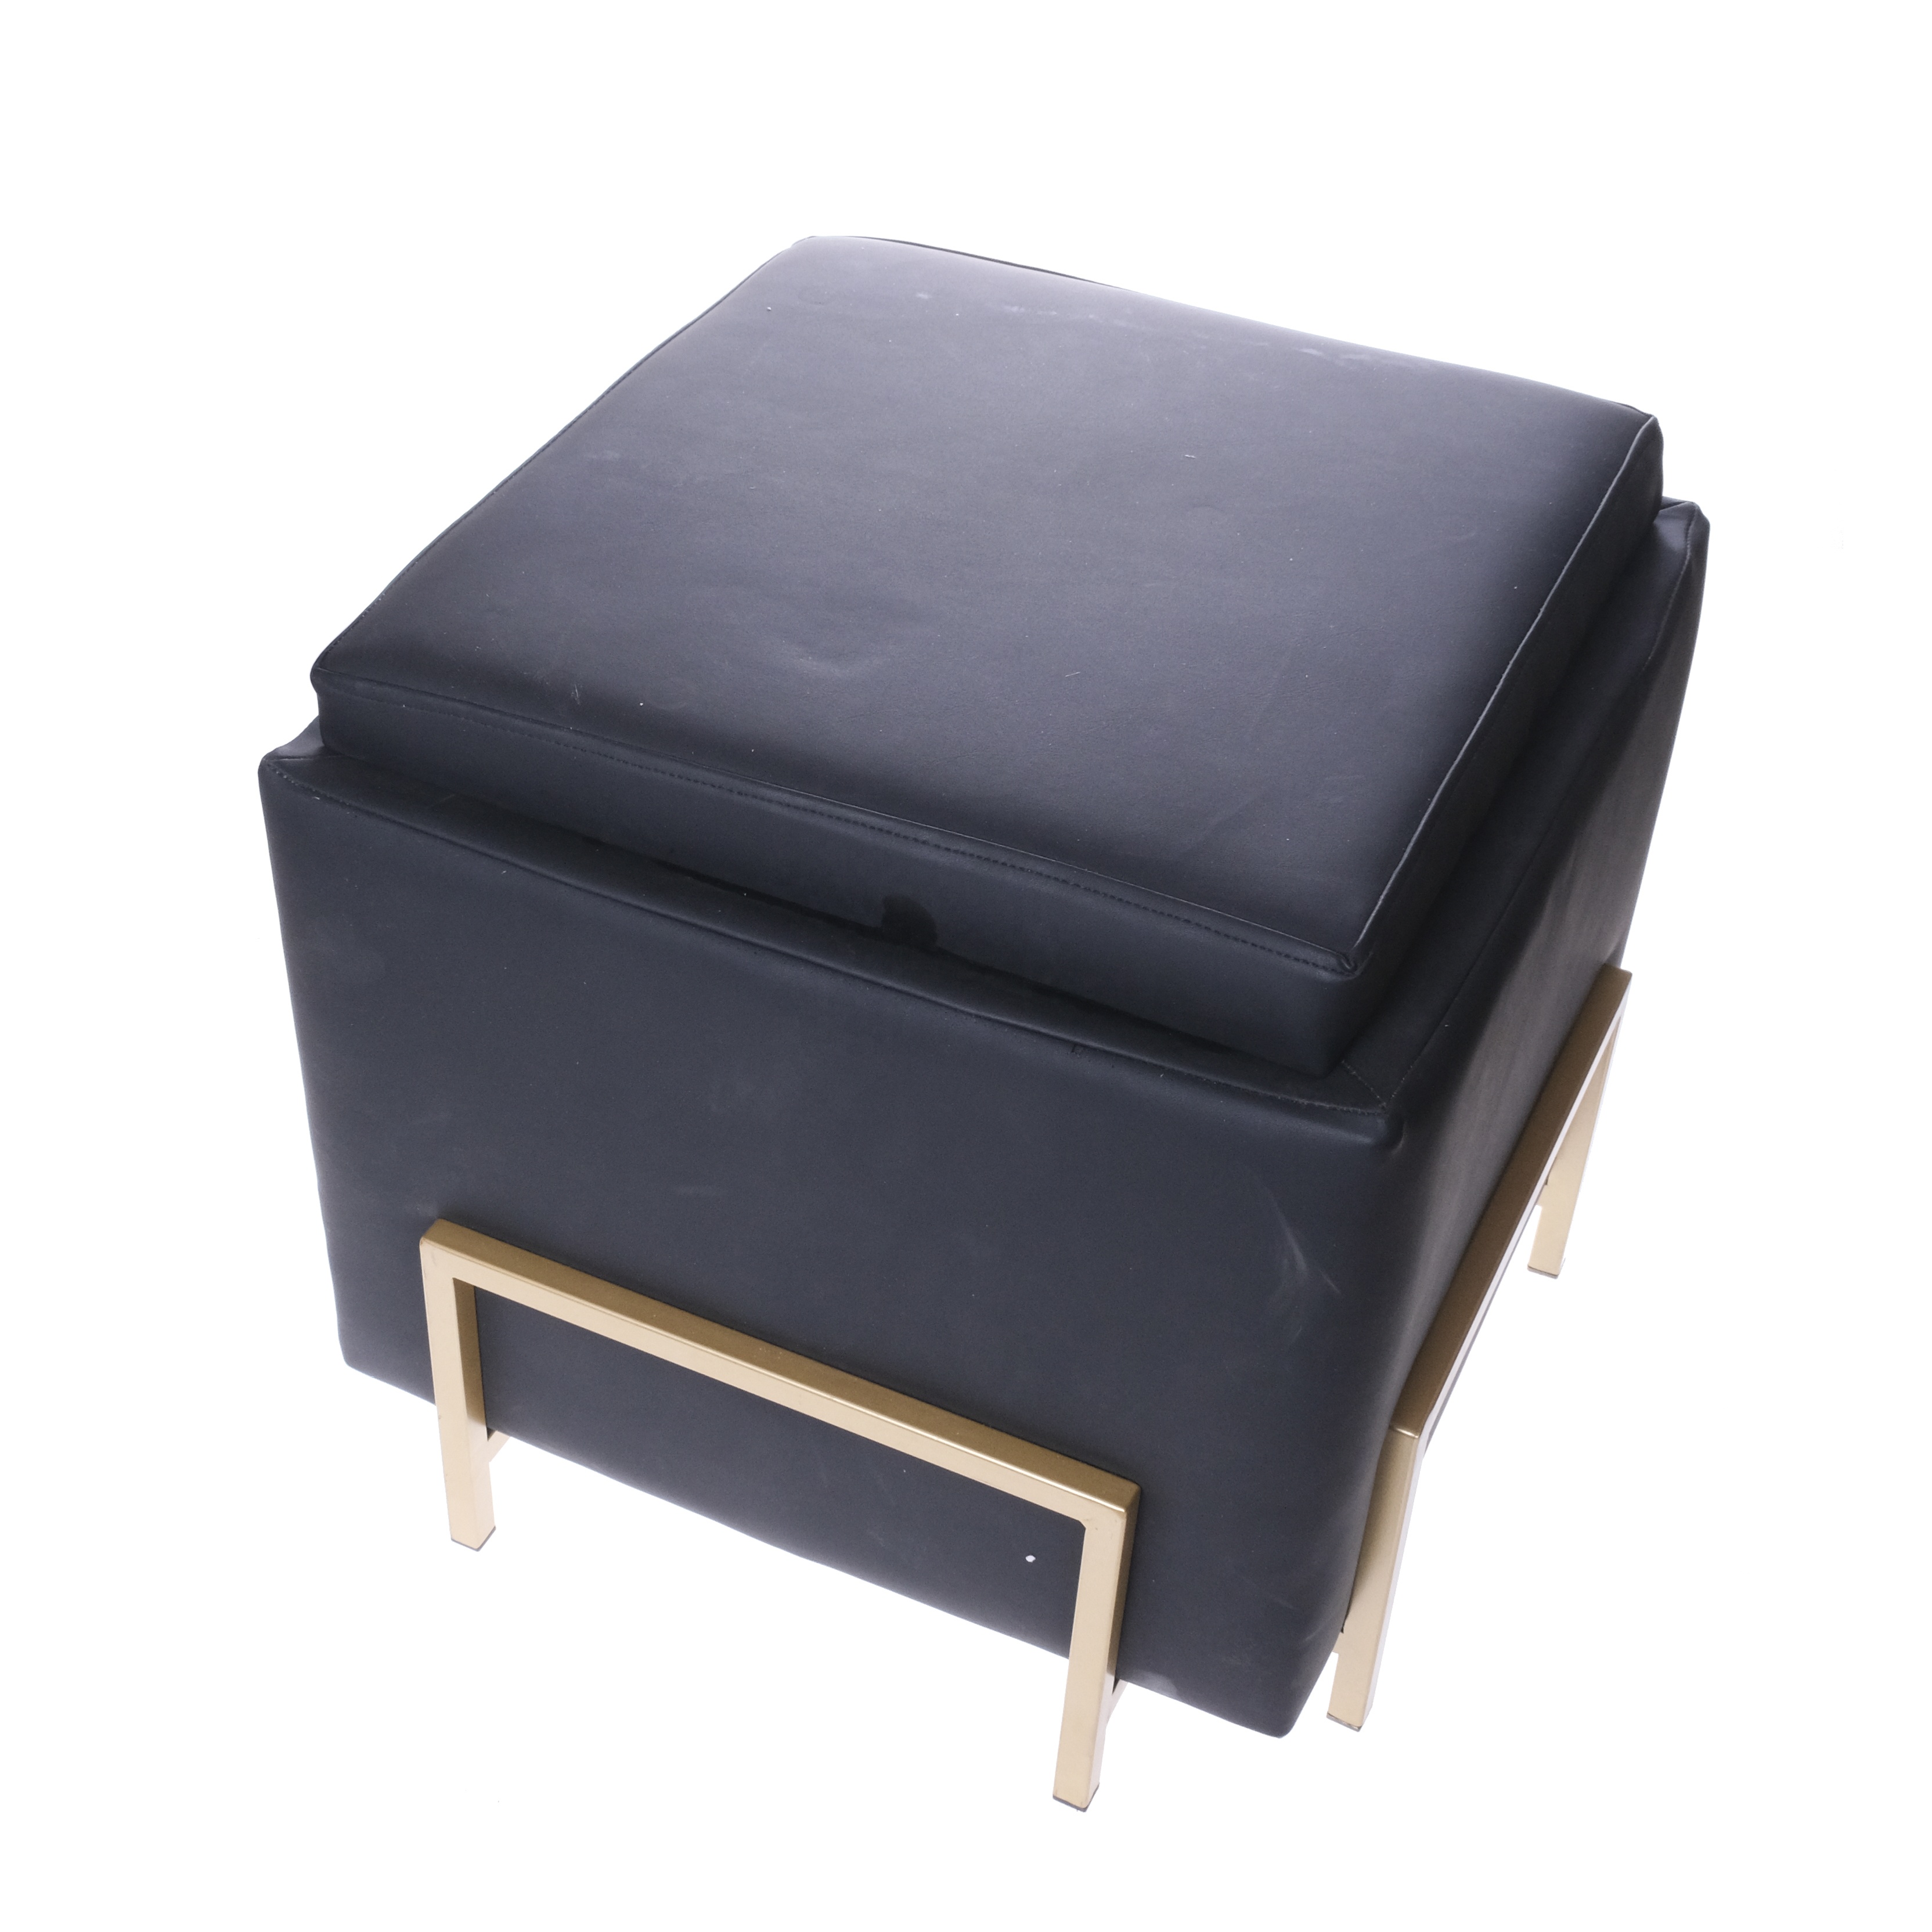 Modern Living Room luxury chair leather storage stool and ottoman